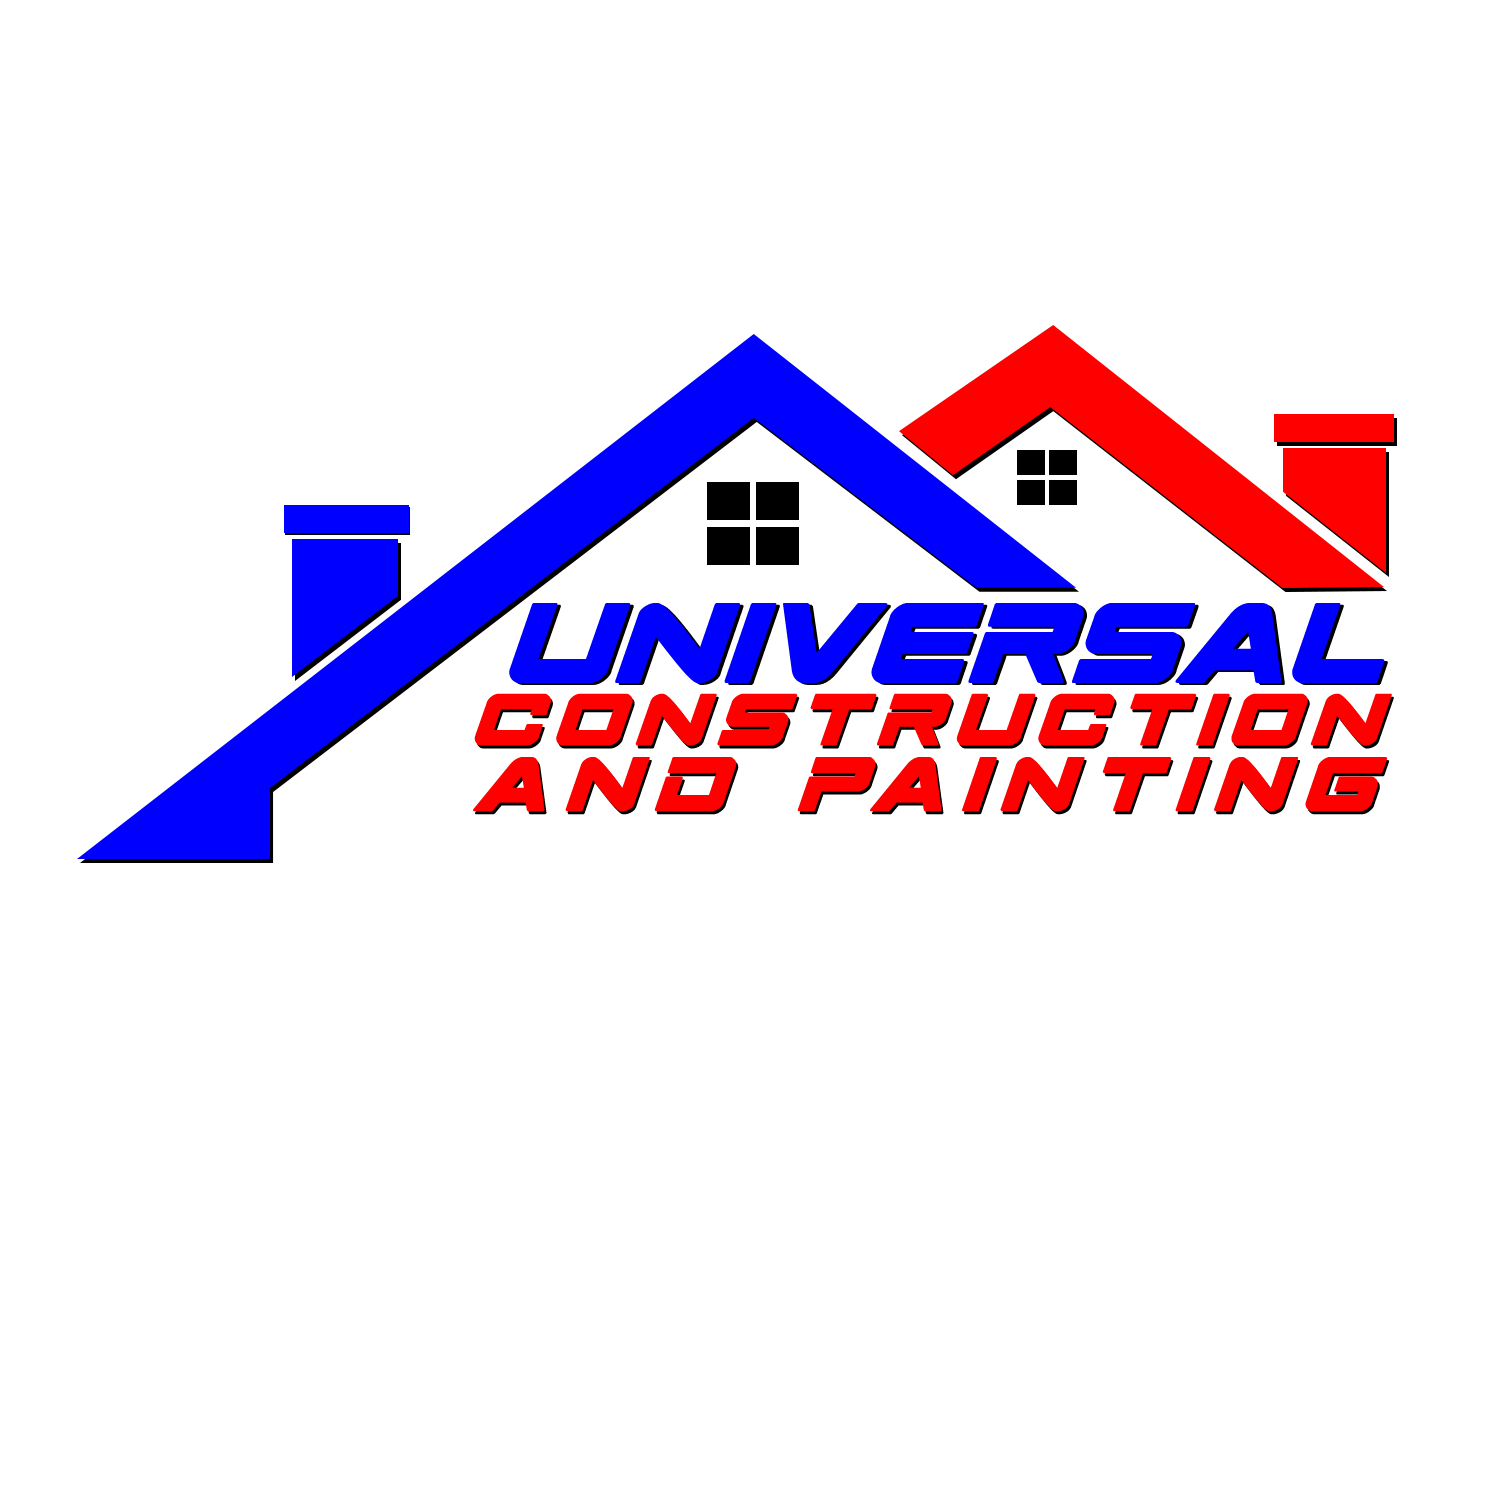 Universal Construction and Painting